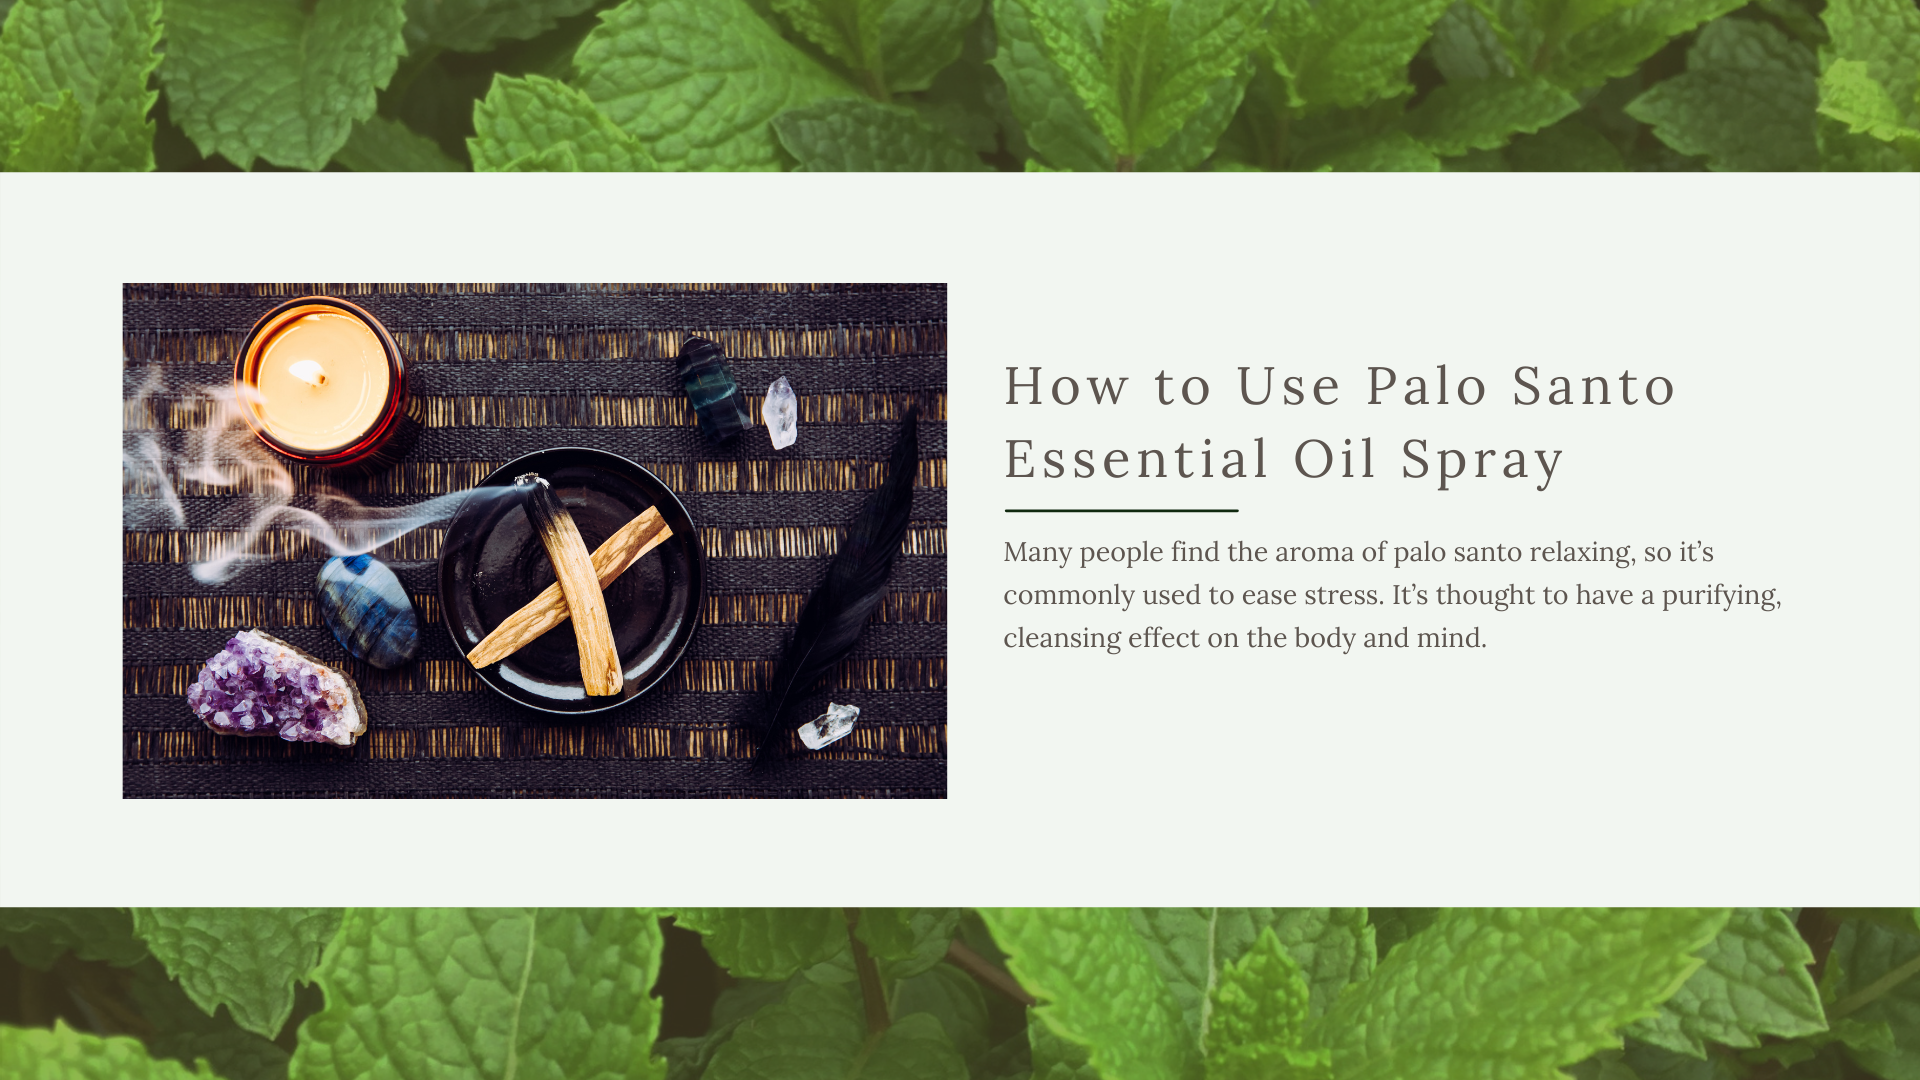  What Is Palo Santo, and How Is It Used Medicinally